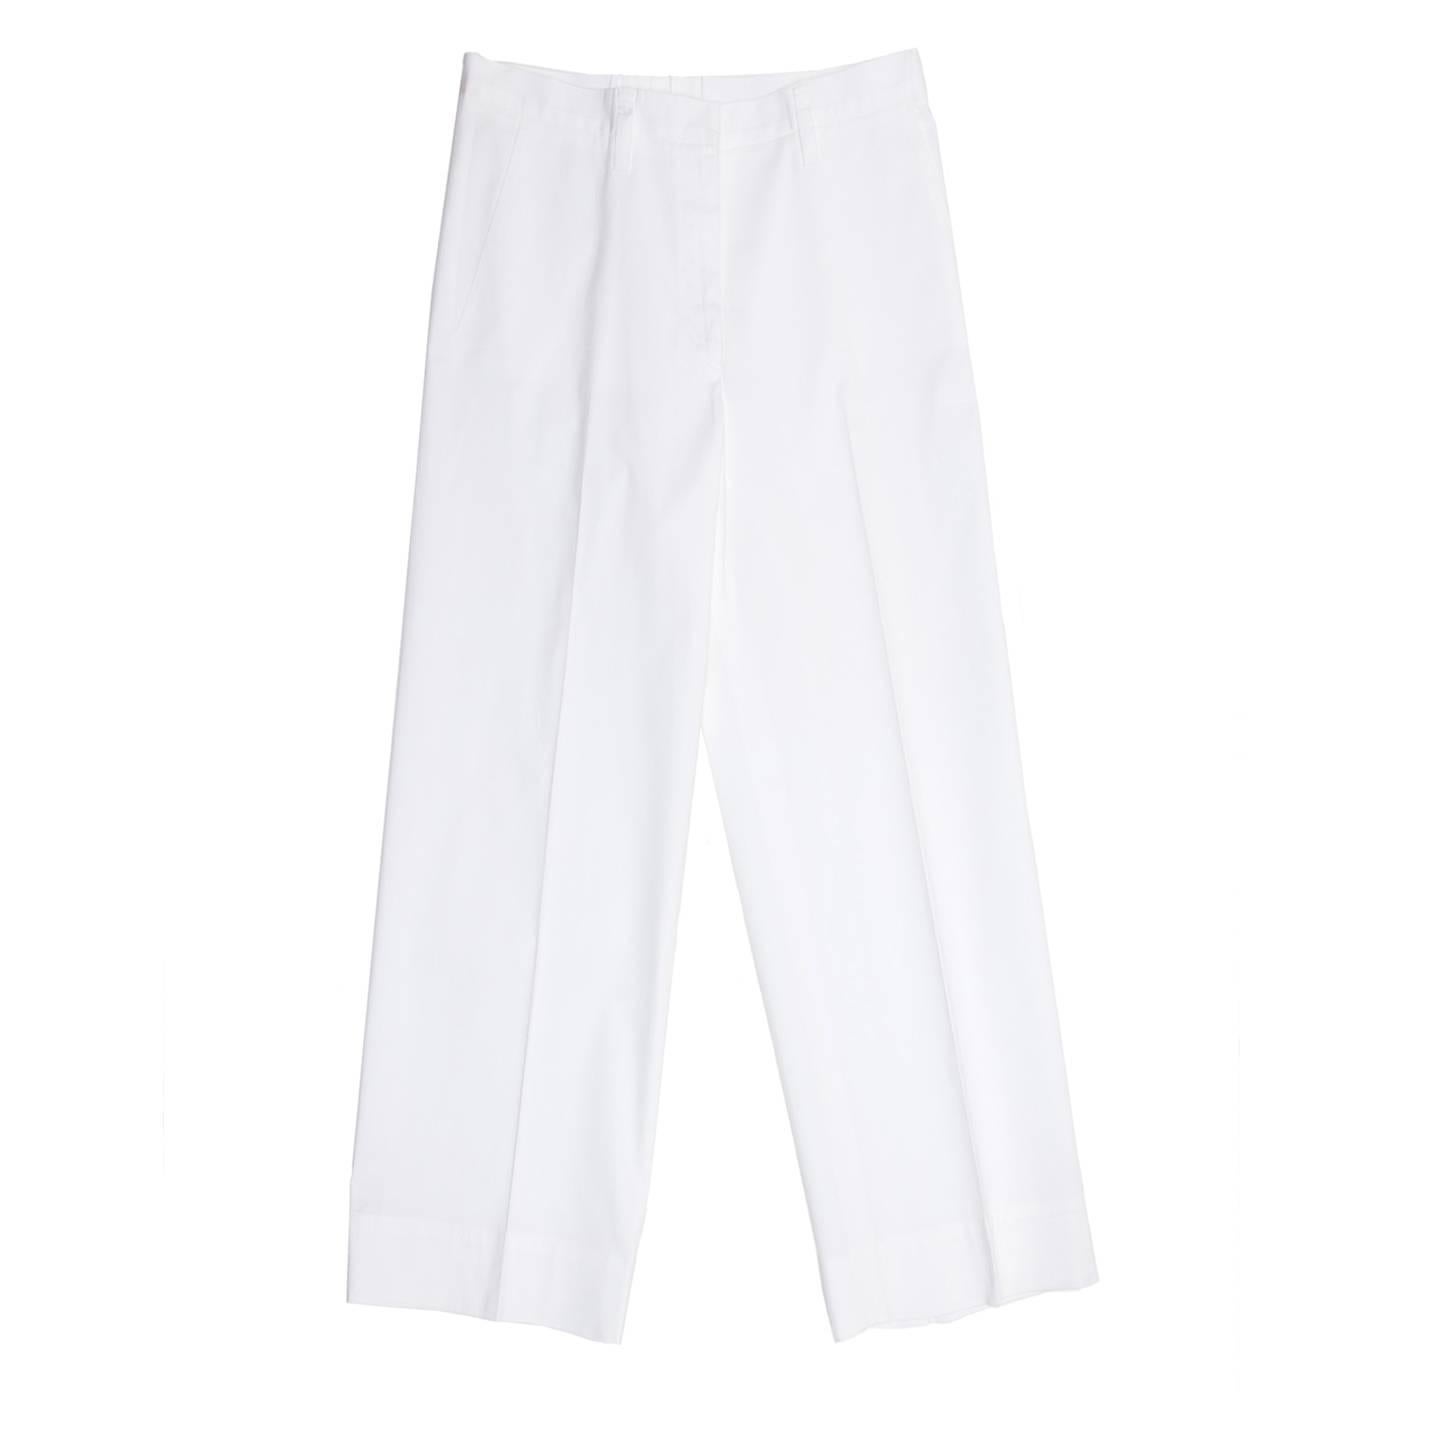 Classic white cotton and elastane trousers with a man's style and wide cropped legs. The pants are suit pleated, slash pockets at front and slit pockets at back. The waistband is thin, it fastens at front with a hidden hook and it's enriched by long